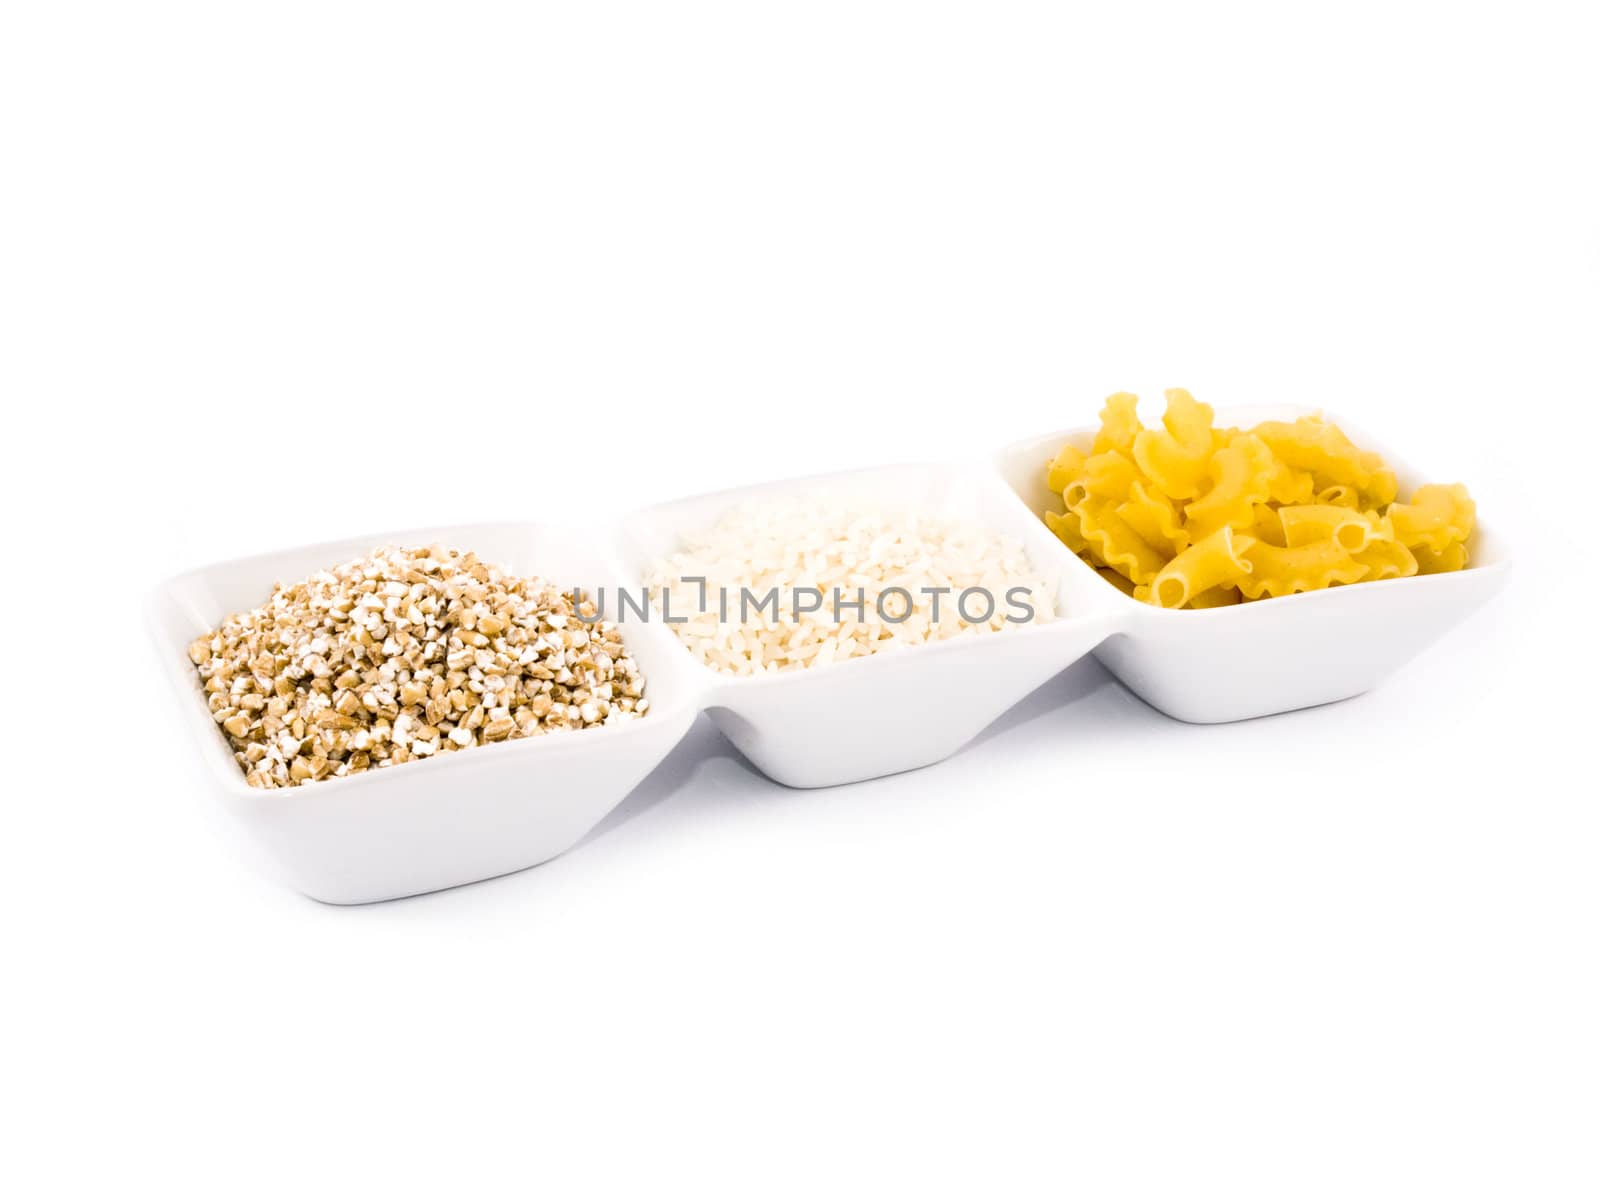 Three porceline bowls filled with pasta, groats and rice, on white background